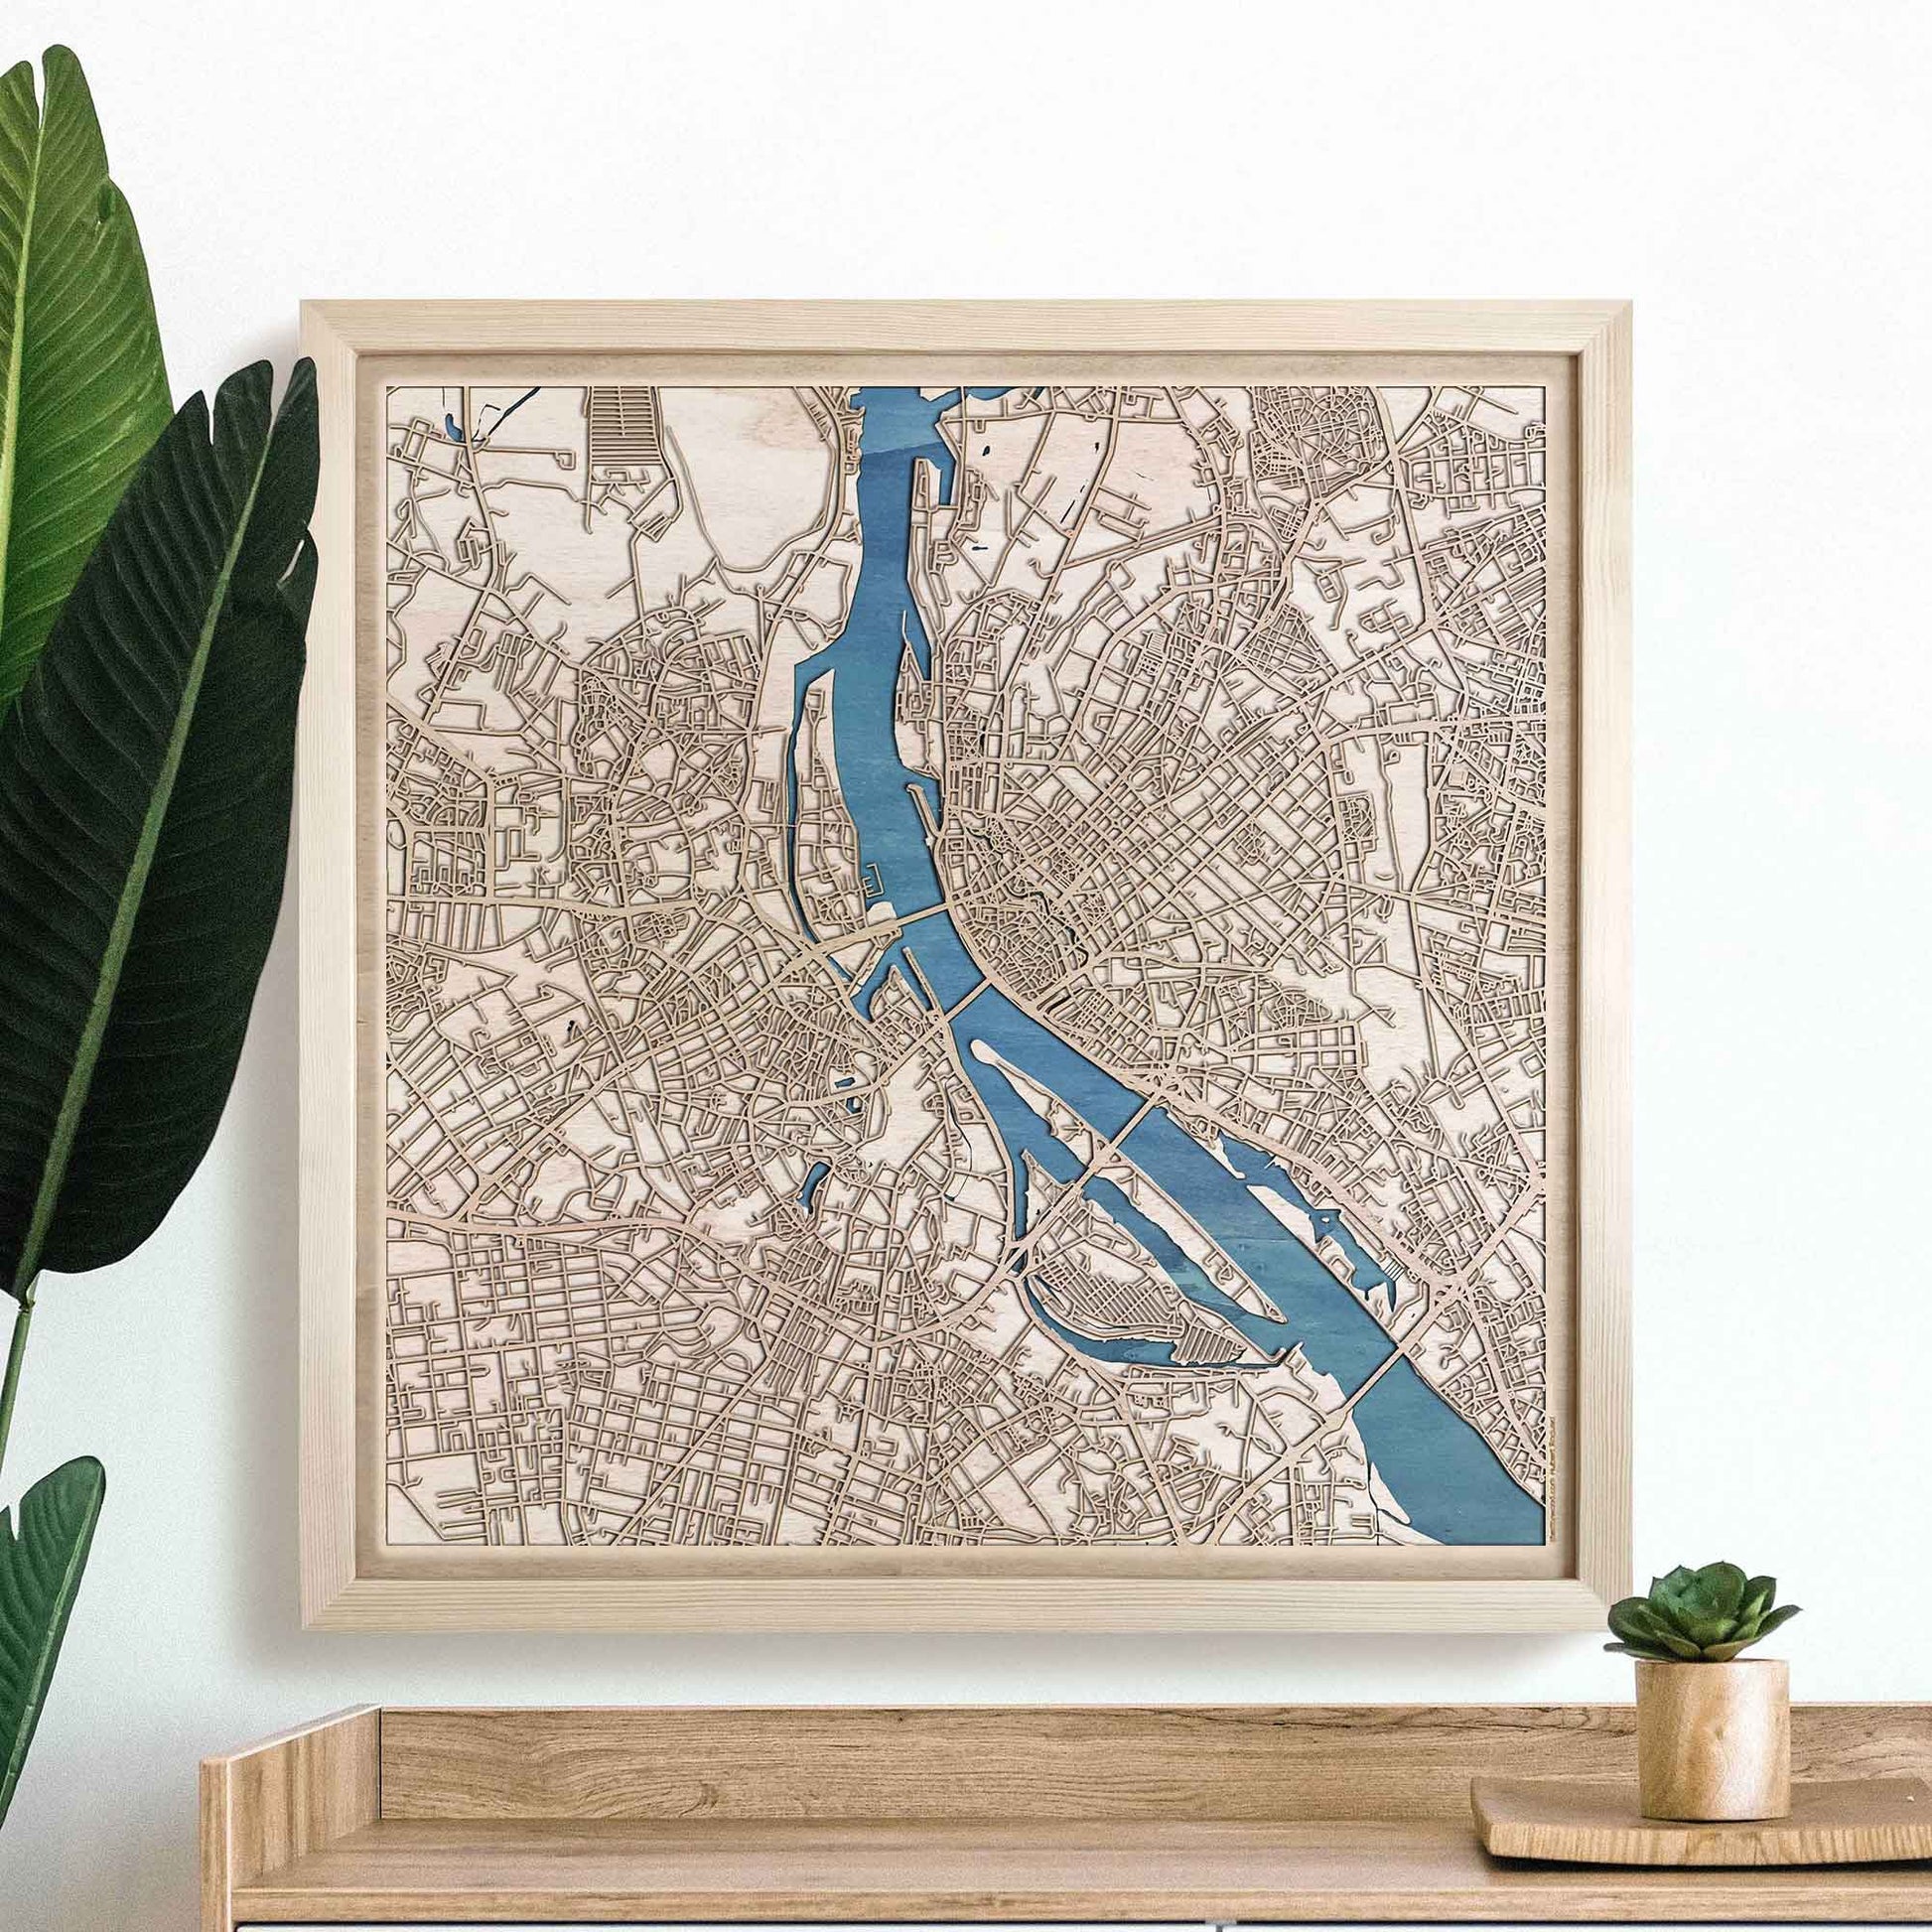 Riga Wooden Map by CityWood - Custom Wood Map Art - Unique Laser Cut Engraved - Anniversary Gift